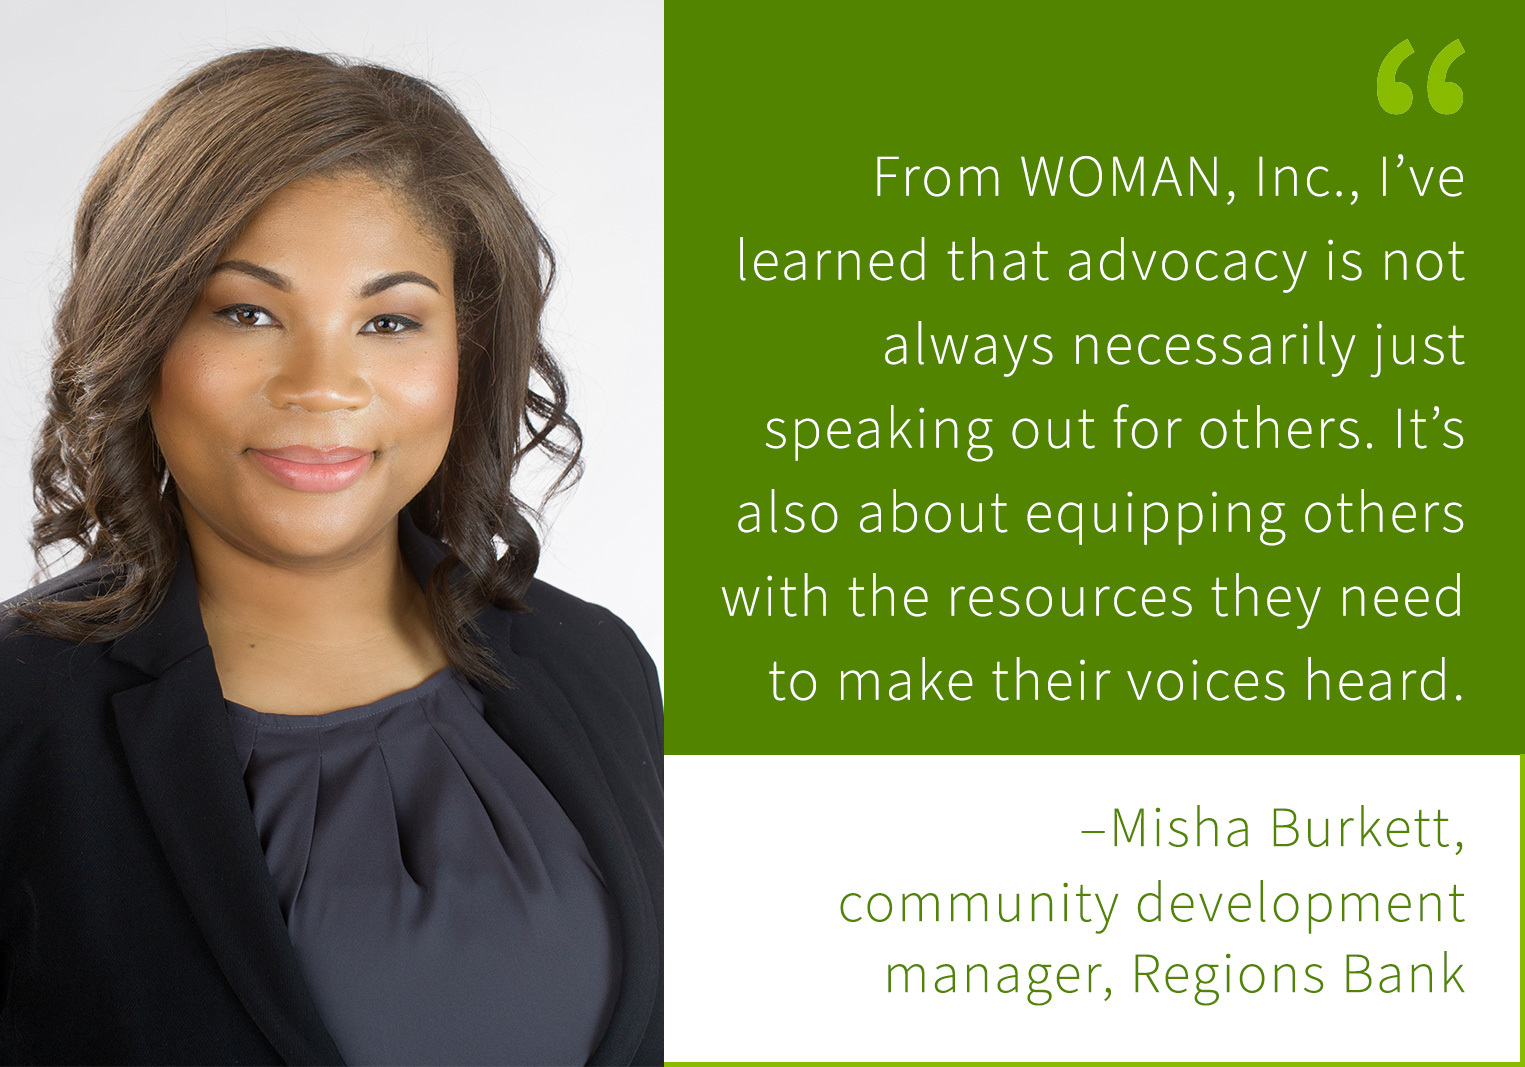 Photo of Misha Burkett with quote that reads, "From WOMAN, Inc., I’ve learned that advocacy is not always necessarily just speaking out for others. It’s also about equipping others with the resources they need to make their voices heard."